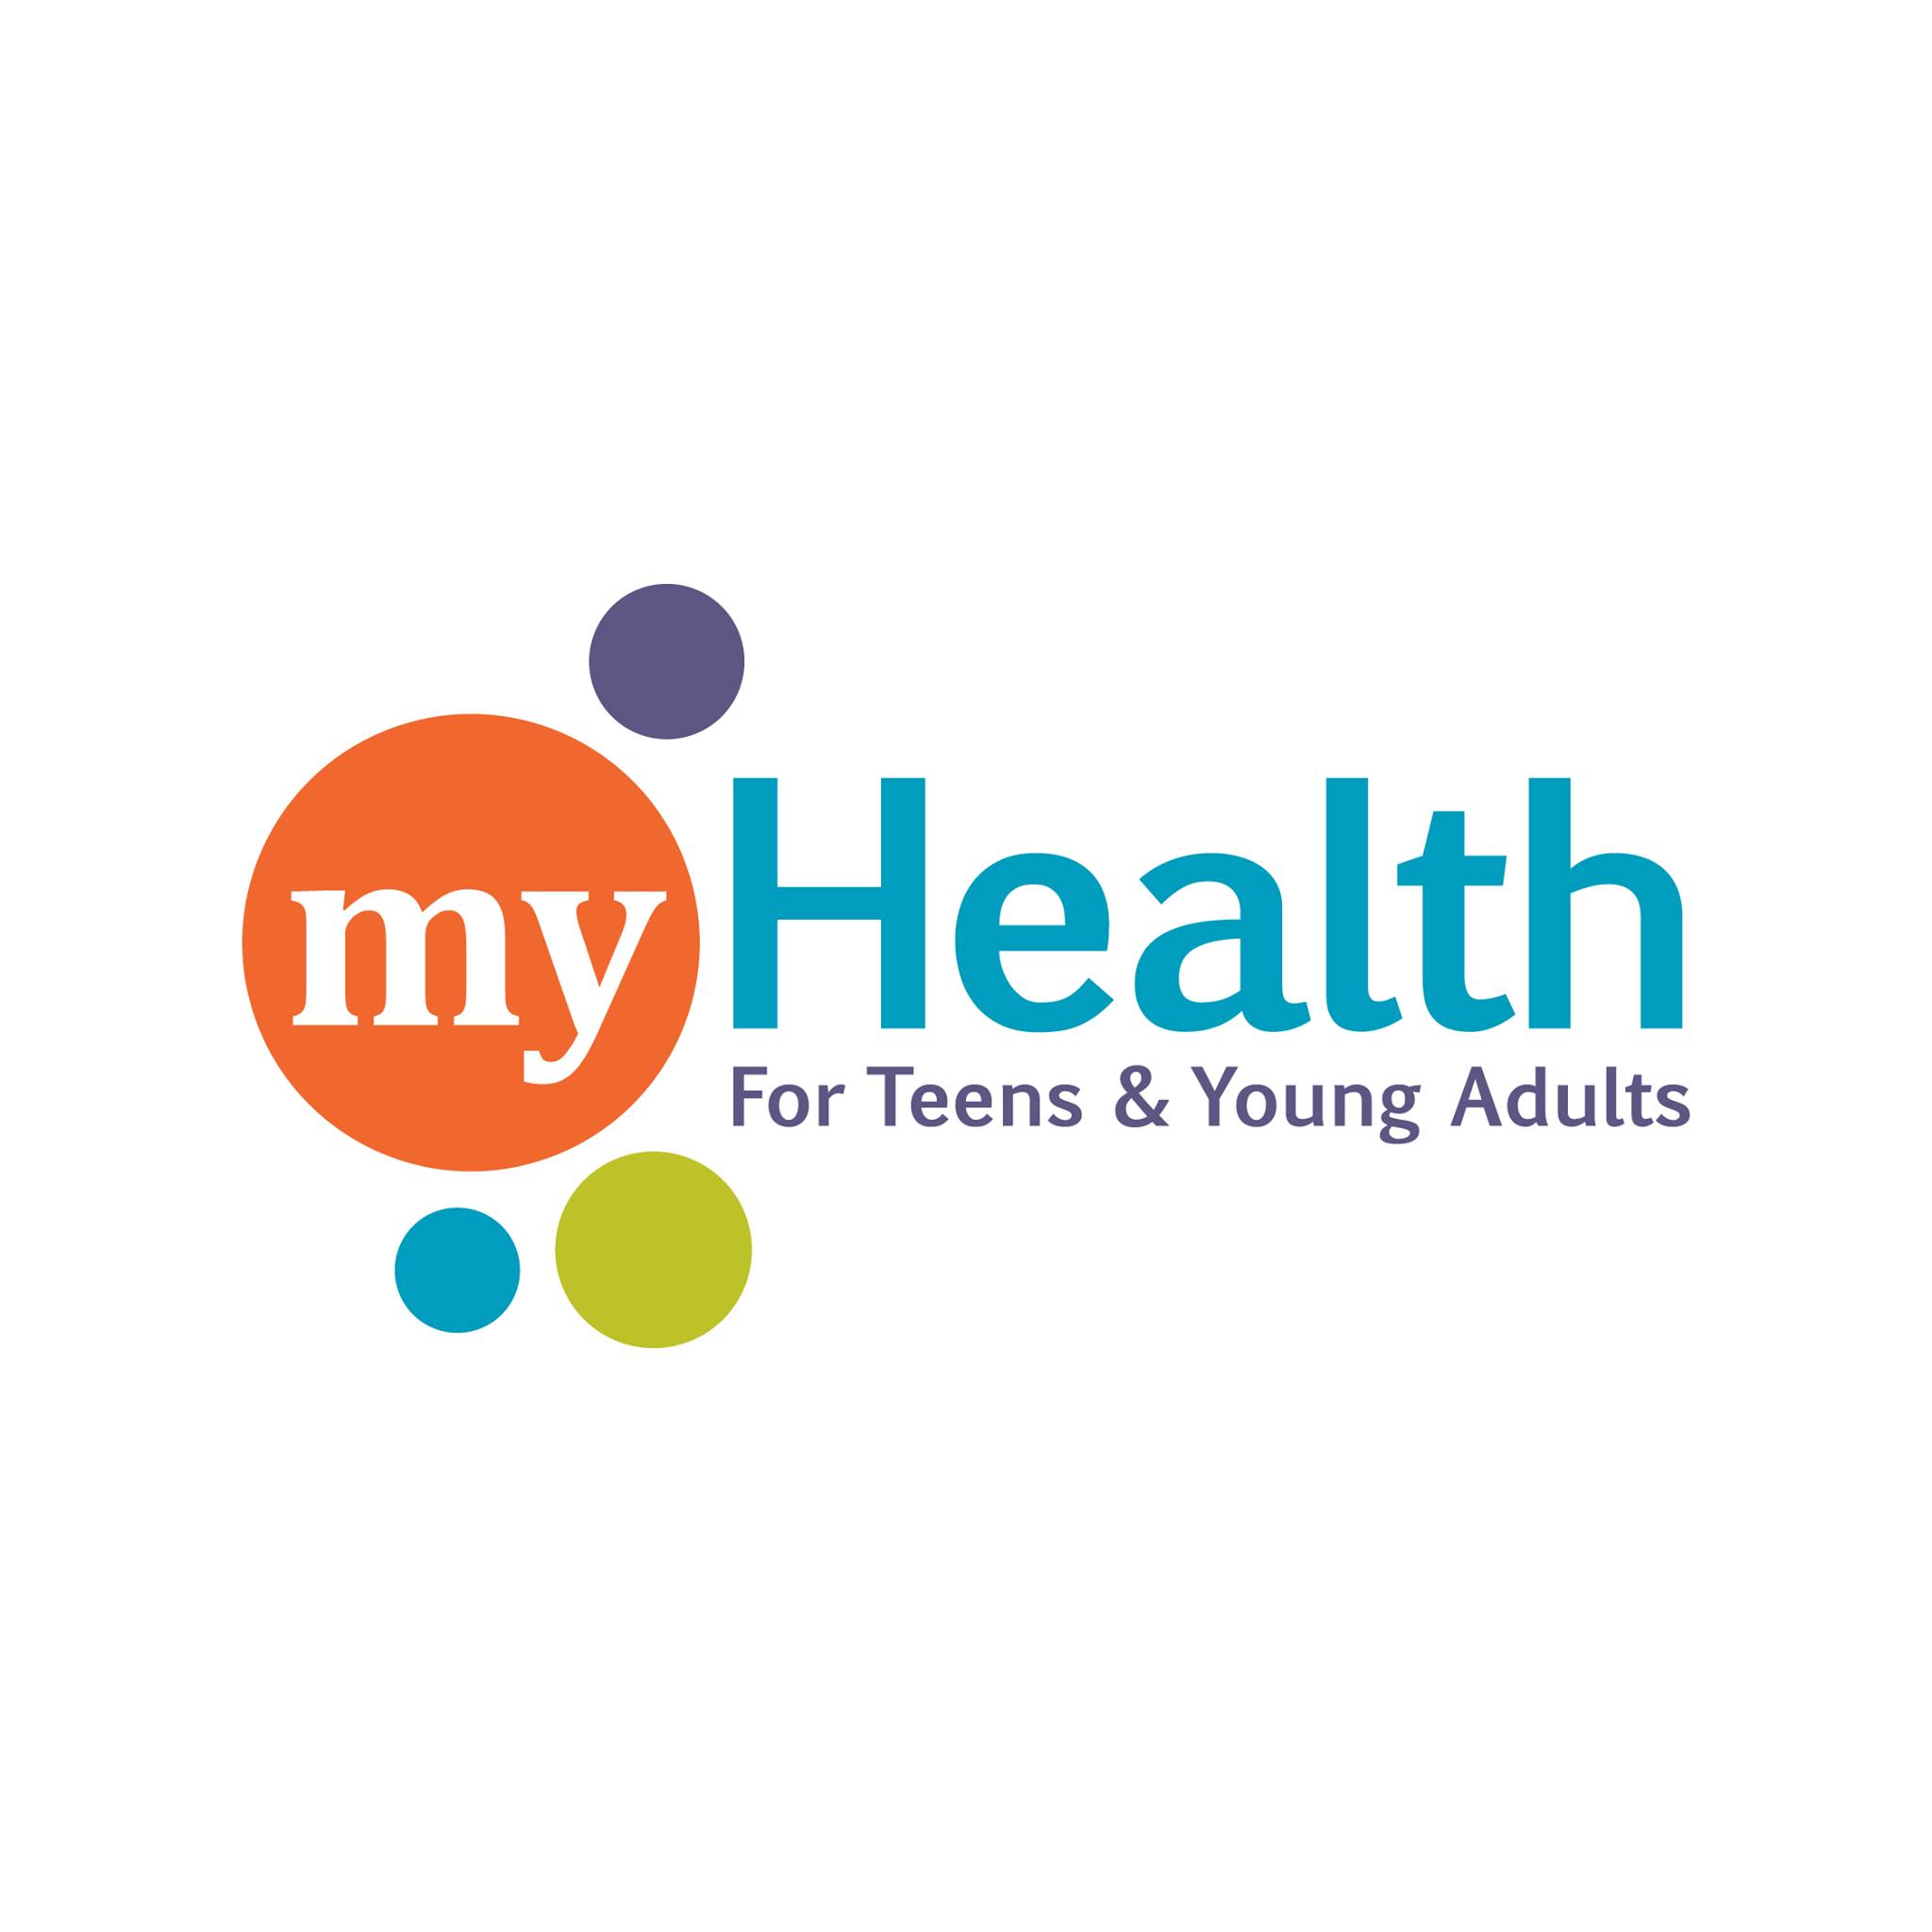 myHealth for Teens and Young Adults